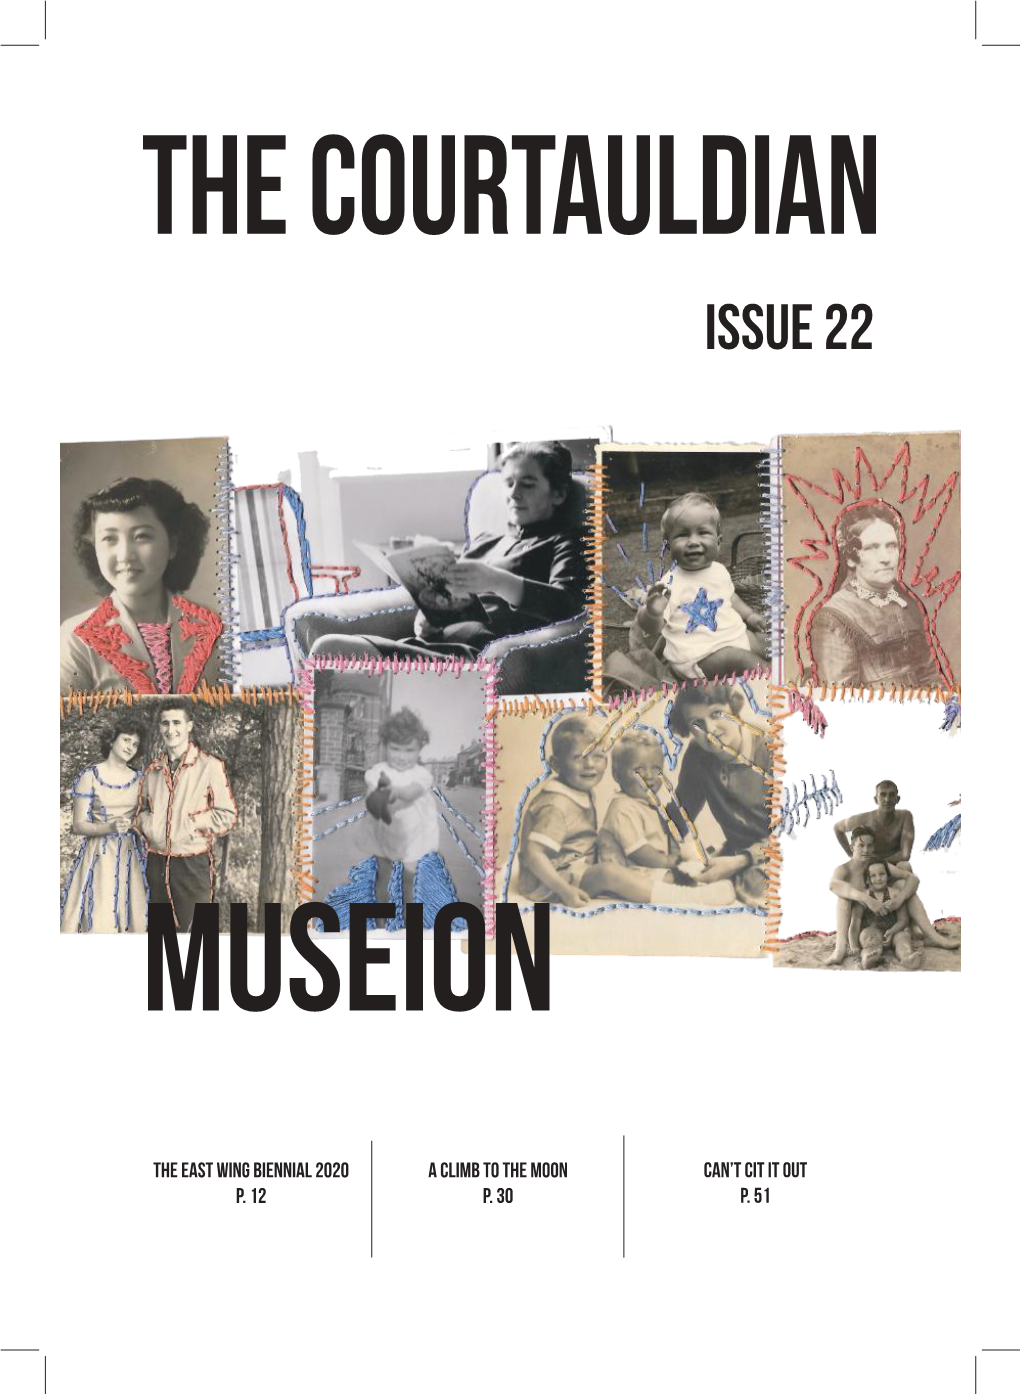 The Courtauldian Issue 22